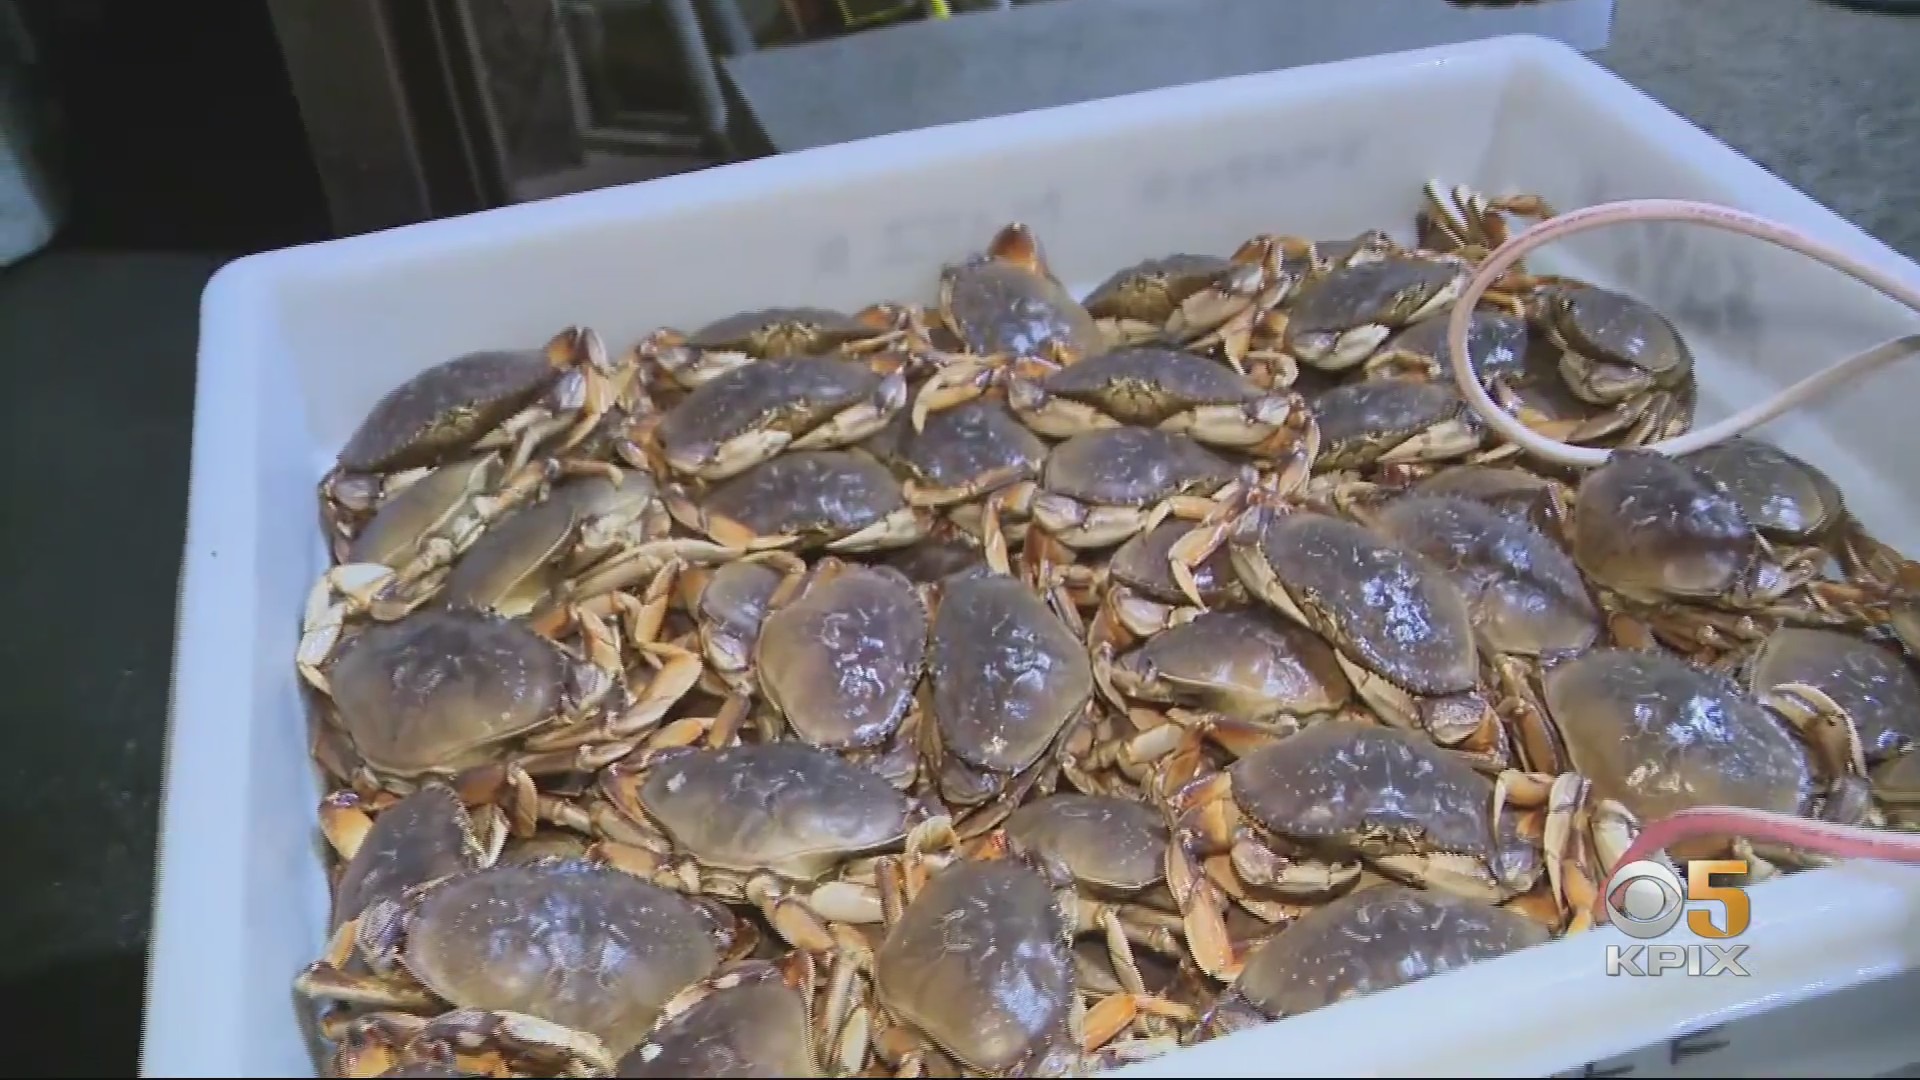 Dungeness crabs, the first of the season, arrive at Pier 45 in San Francisco, January 13, 2021. (CBS)